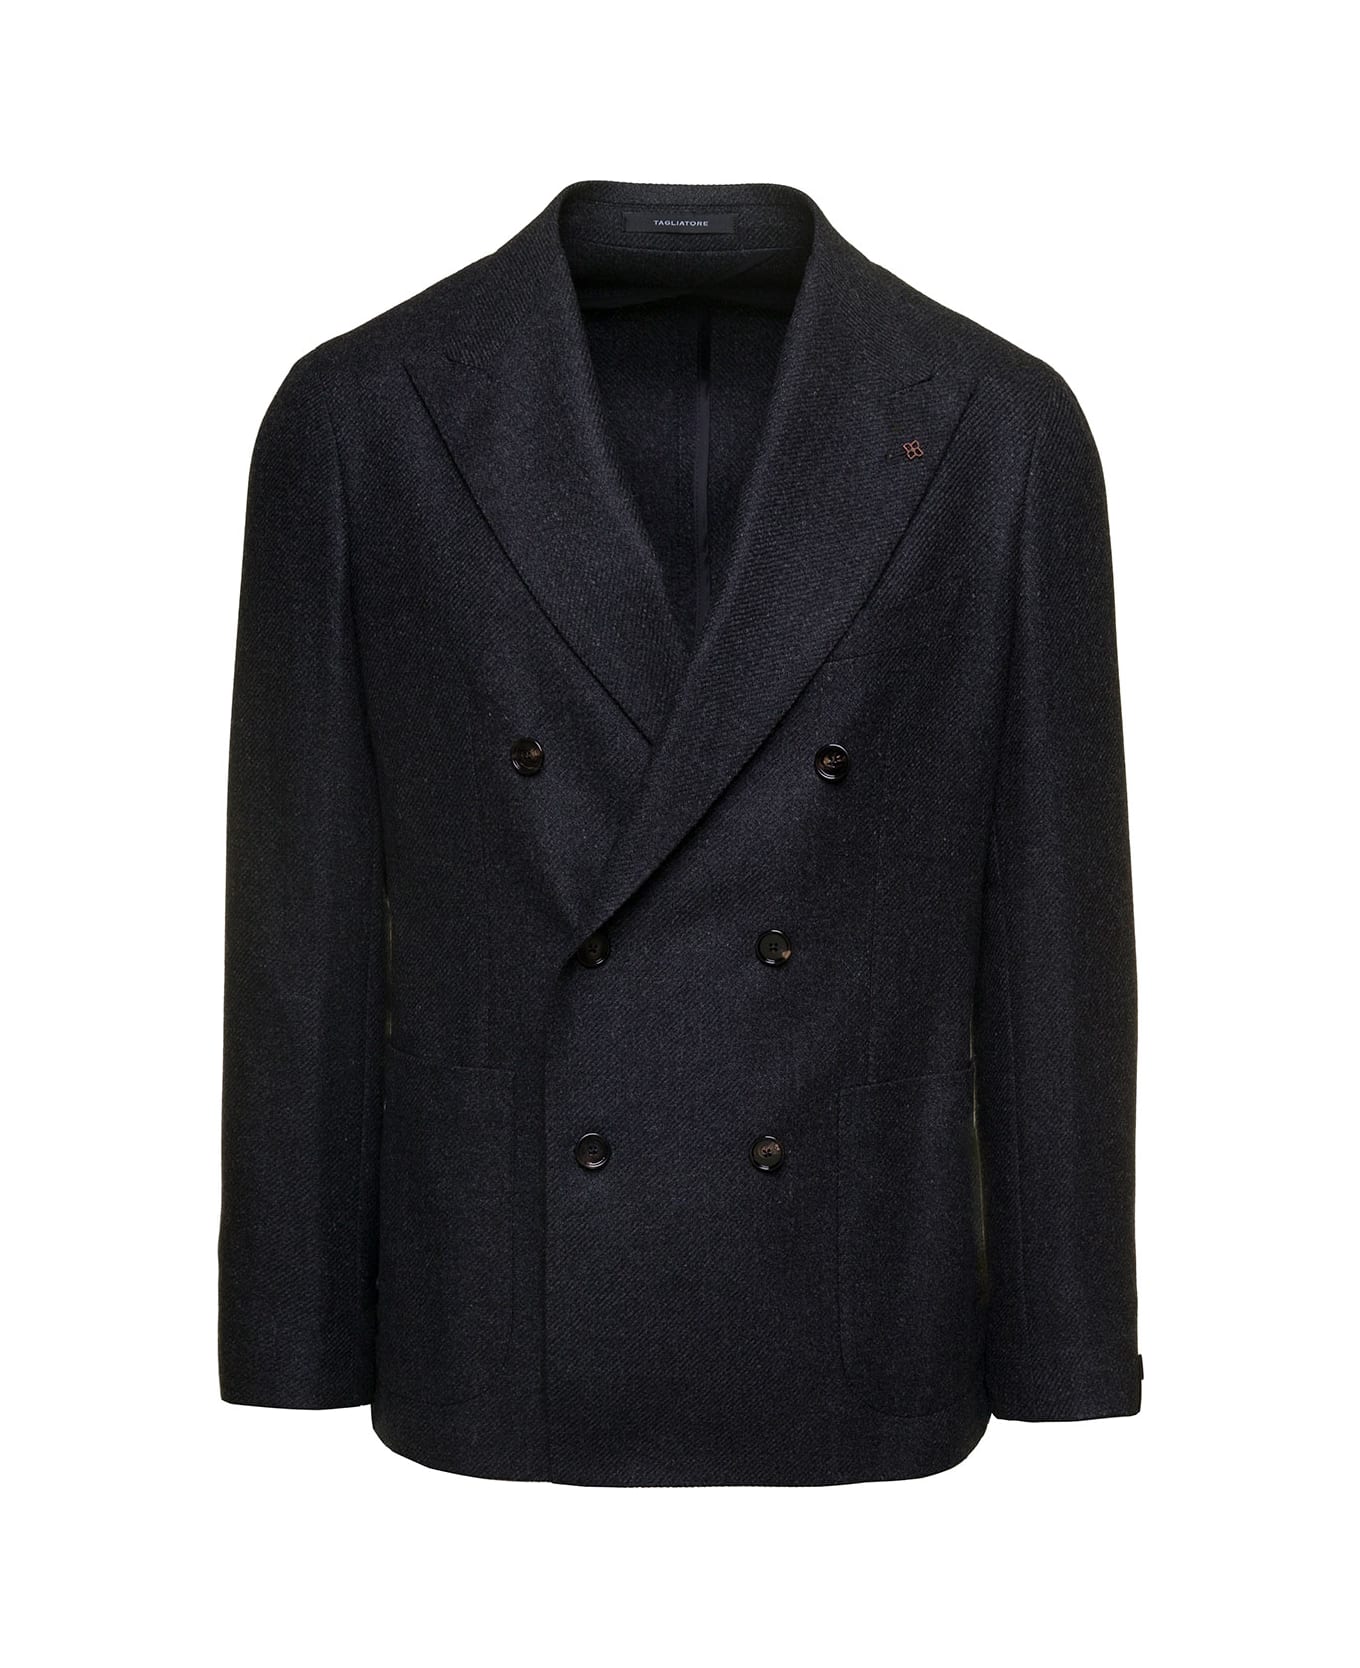 Tagliatore Grey 'montecarlo' Double-breasted Jacket With Floral Detail In Wool Blend Man - Grey